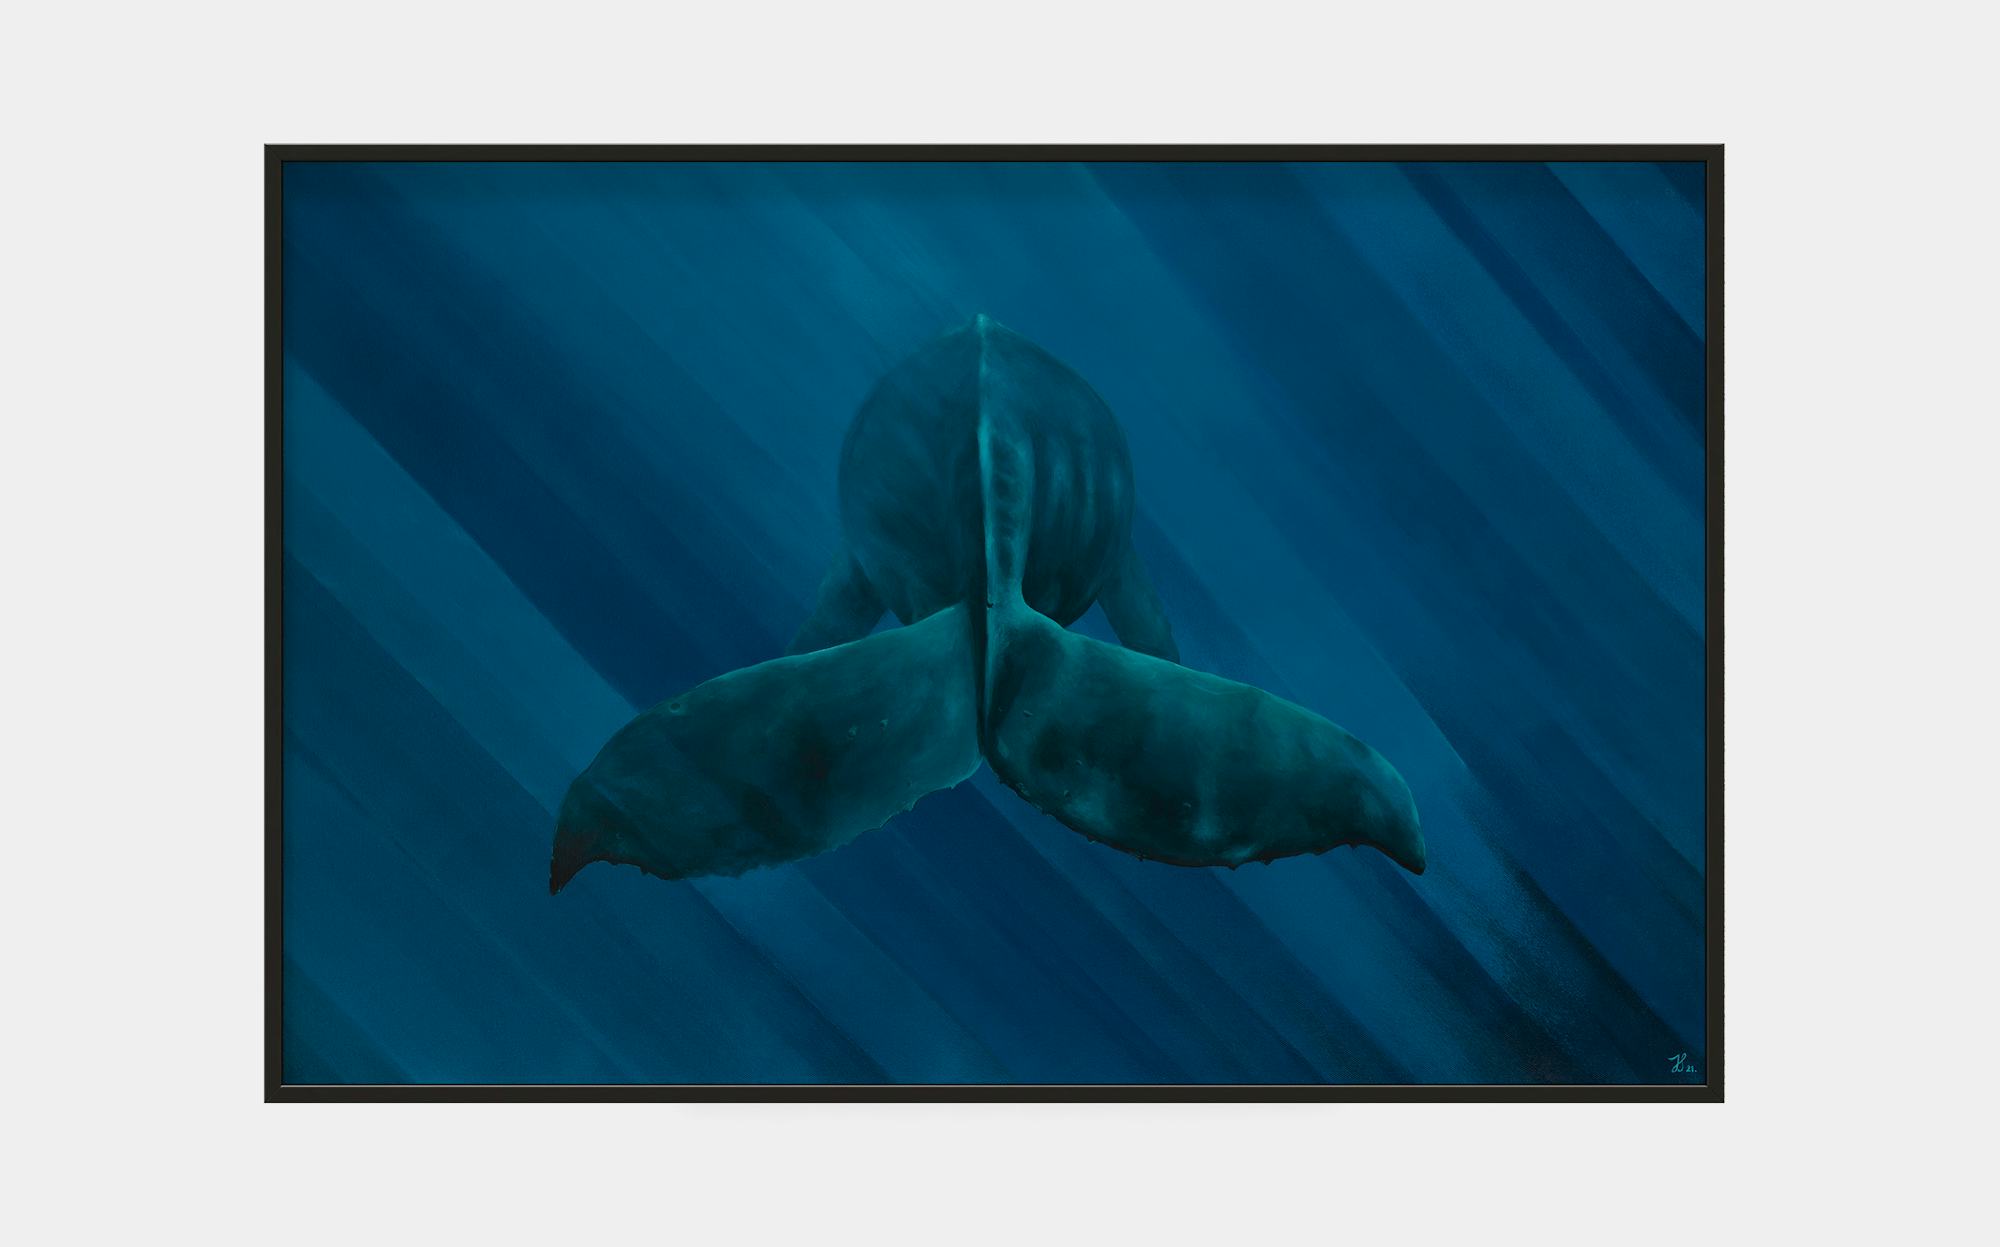 Calming acrylics on canvas painting of a whale floating in the ocean.